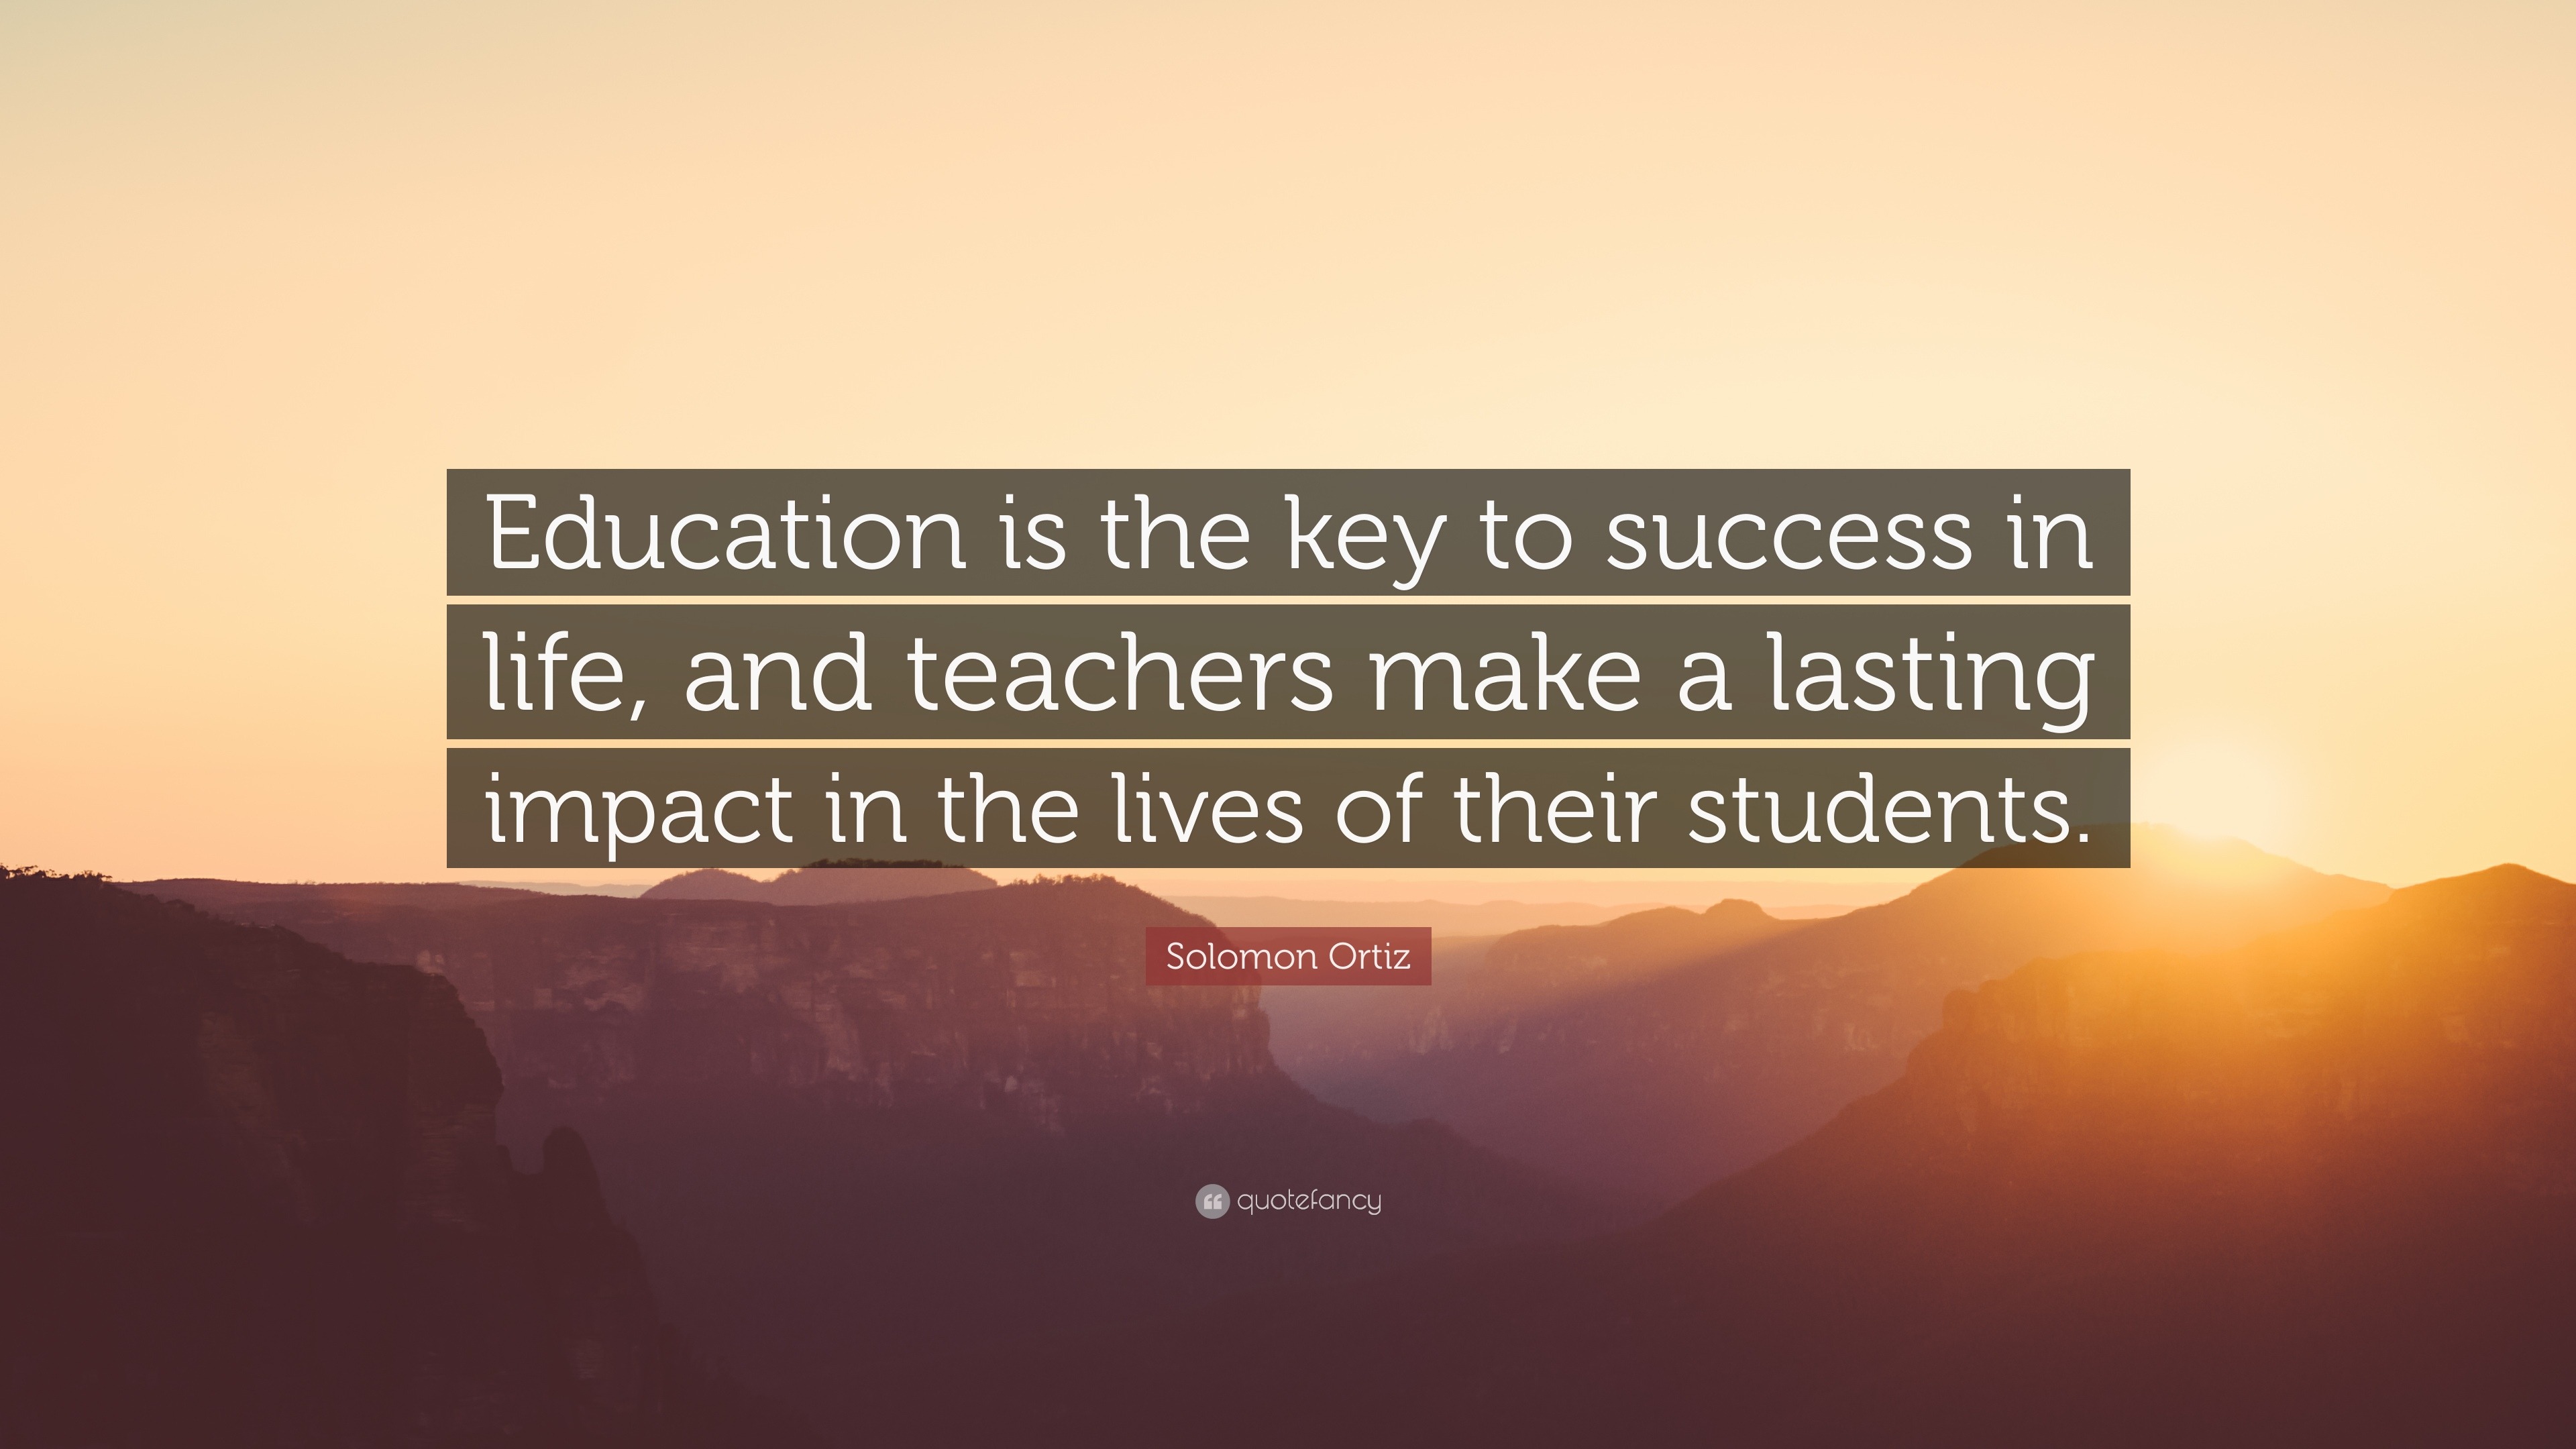 education has as one of its fundamental